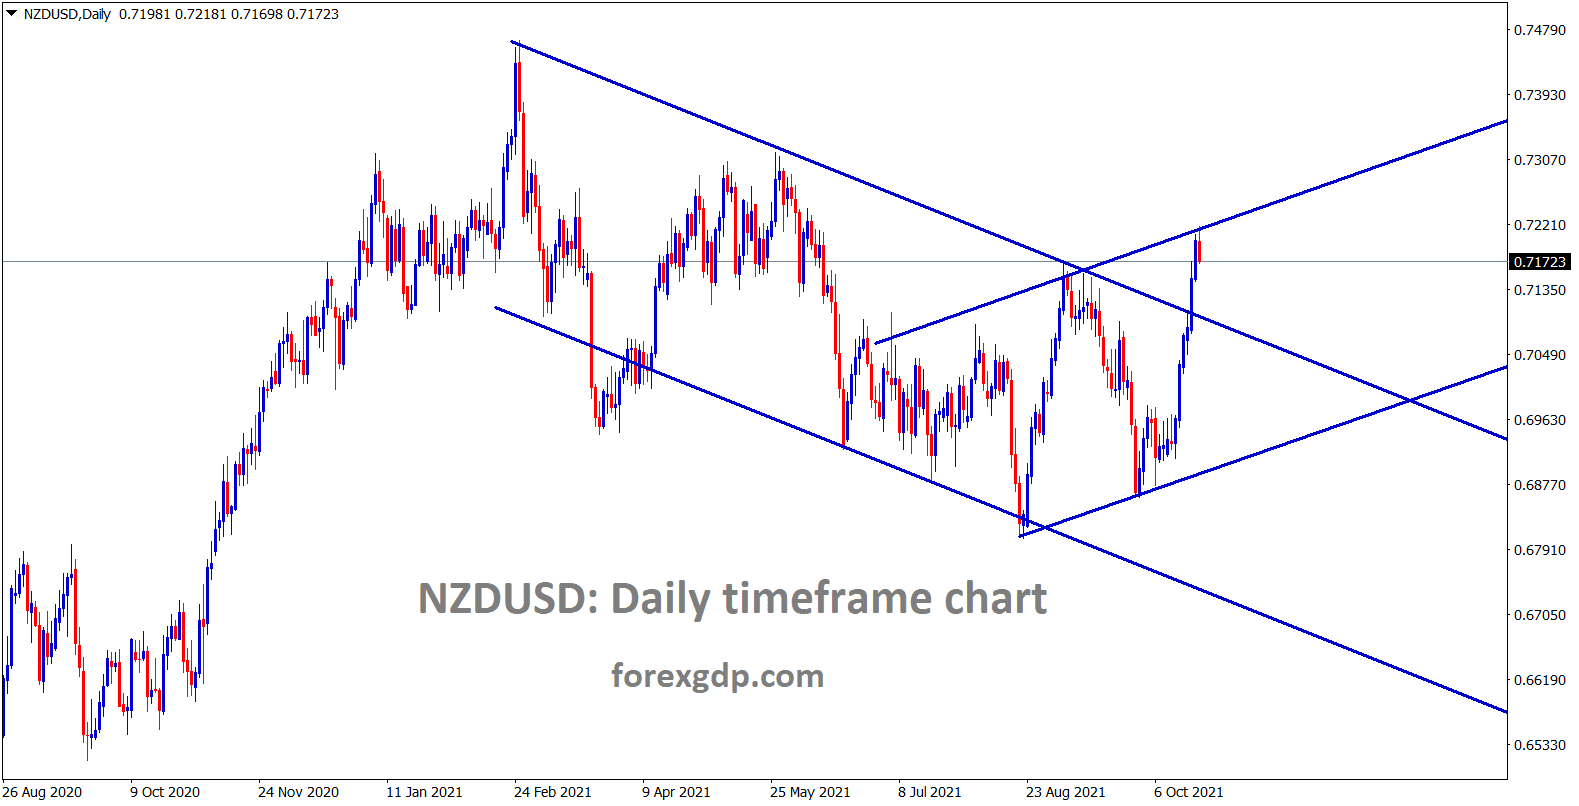 NZDUSD has broken the top of the descending channel and its consolidating at the higher high area of the range